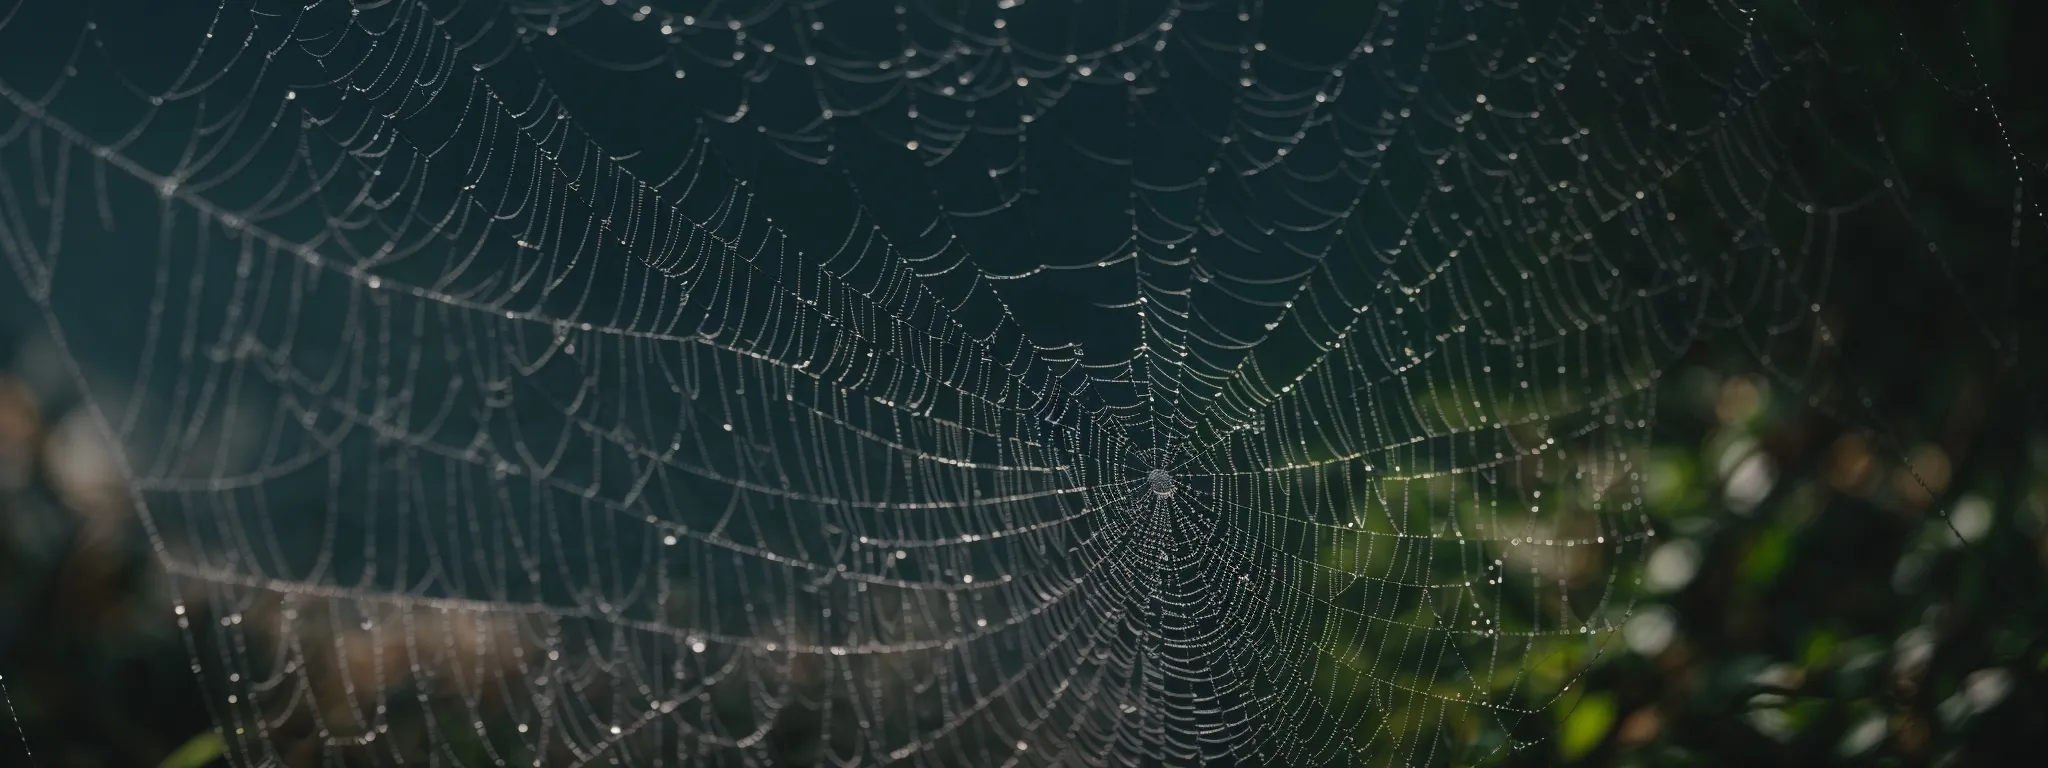 a close-up of a spider web glistening with dew to symbolize an intricate network of connections.